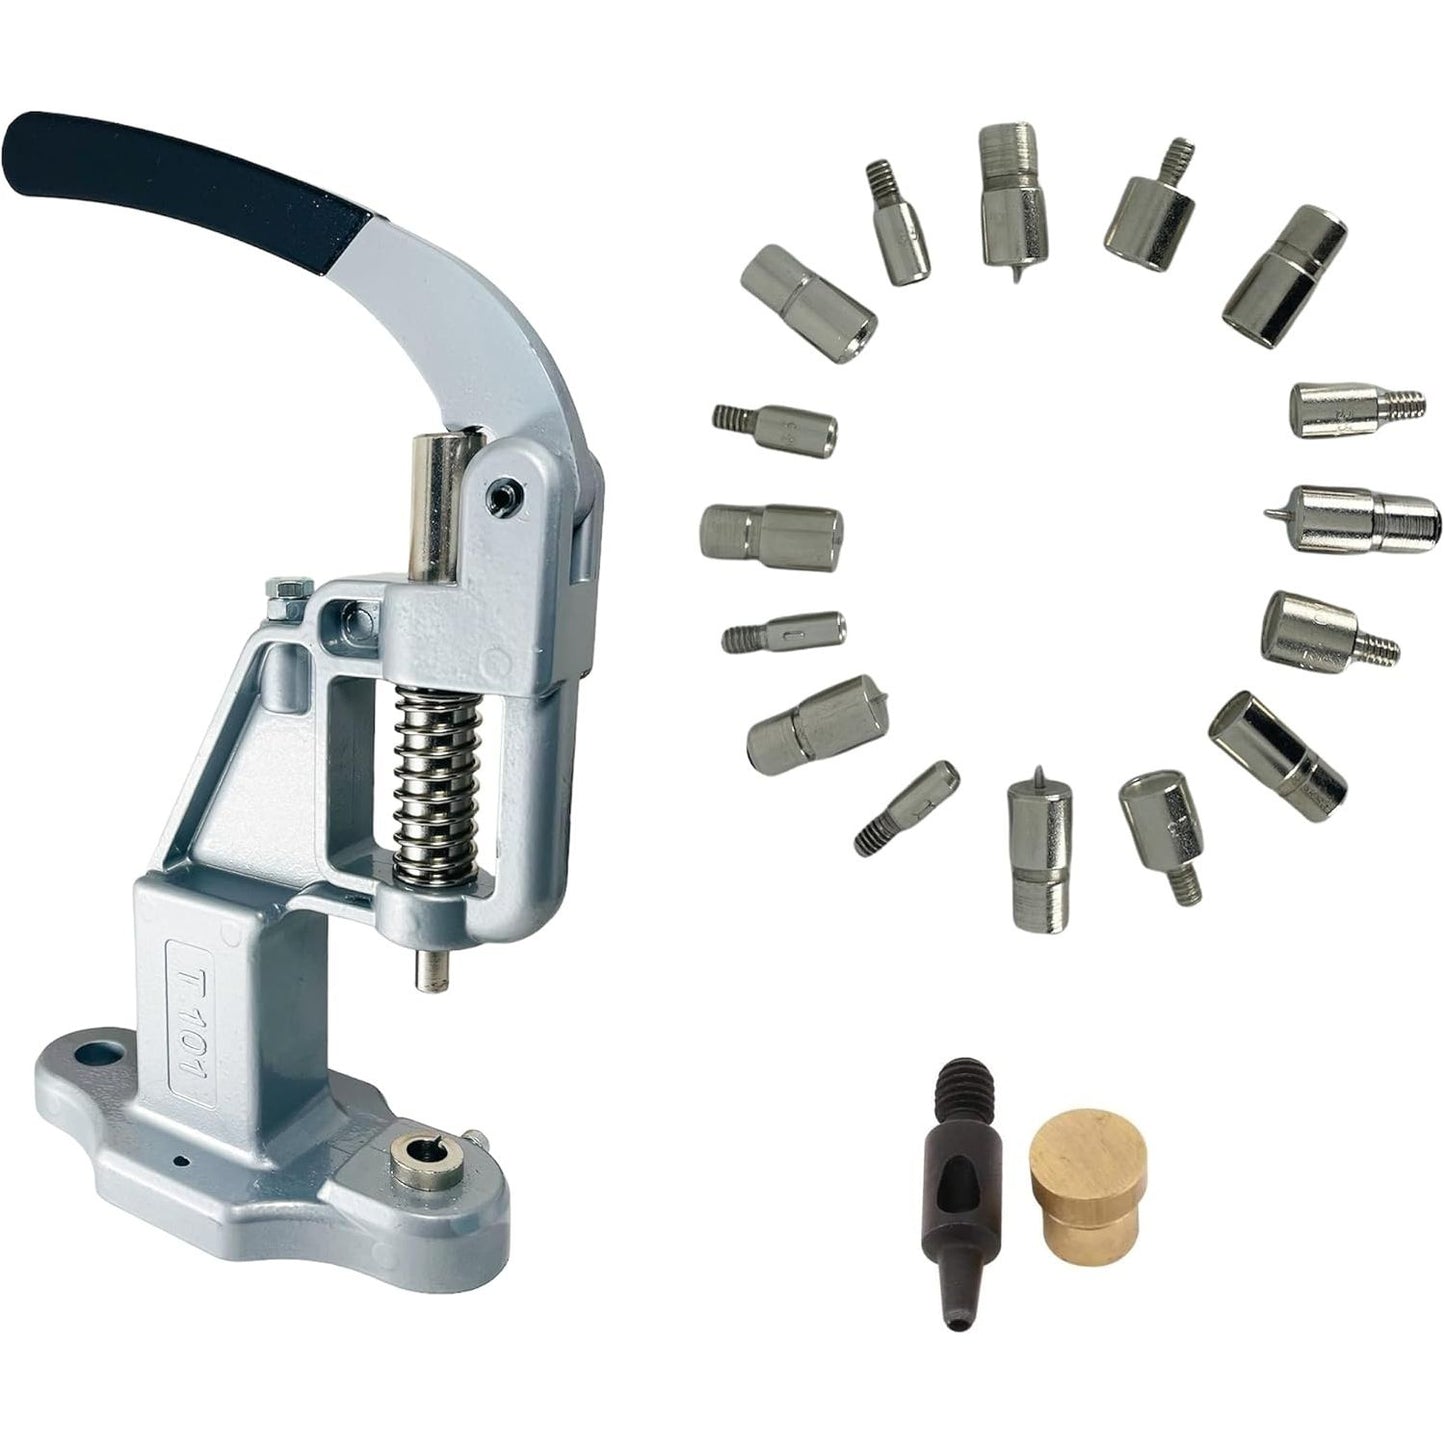 Large Essential Rivet Setting Kit with Hand Press Machine 8 Rivet Dies and 2 mm Hole Punch